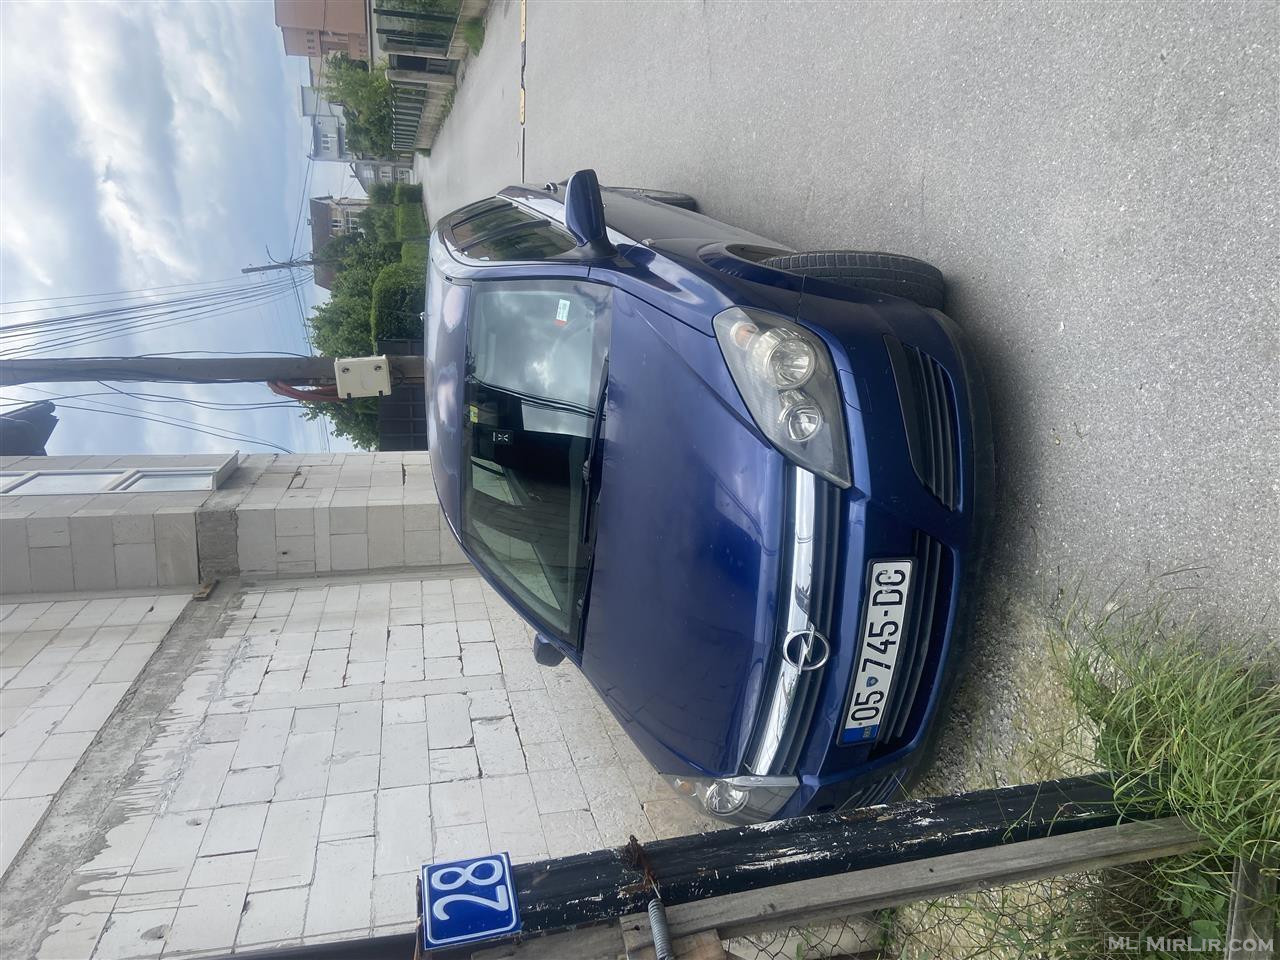 SHES URGJENT OPEL ASTRA TIP TOP 049 93 11 11